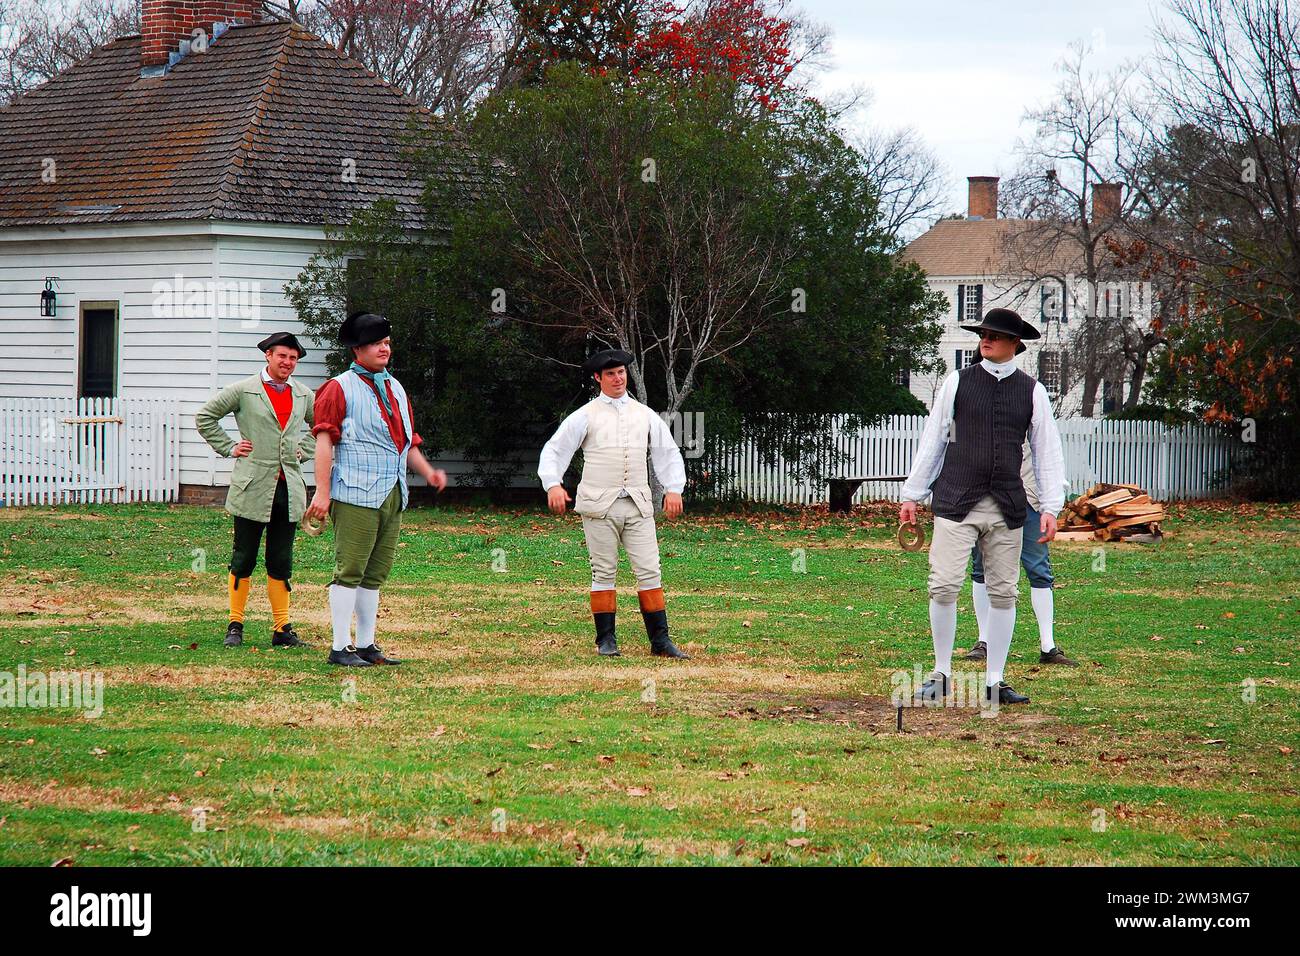 Costumed reenactors in Williamsburg participate in a colonial American pastime game Stock Photo